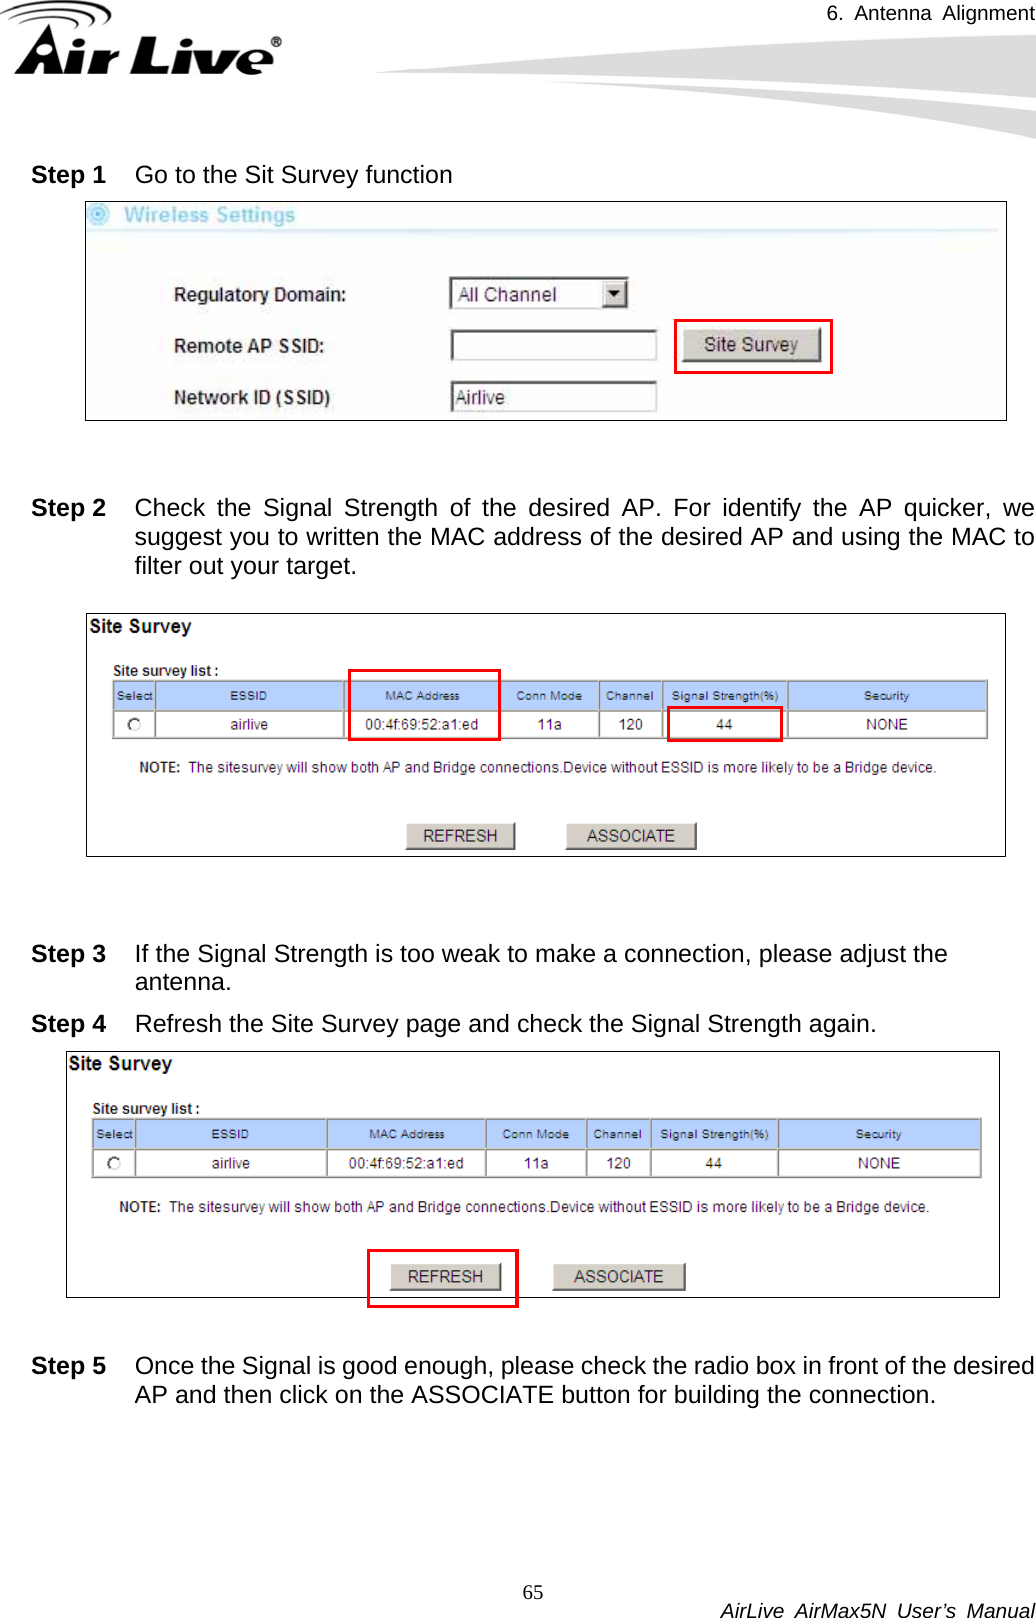 6. Antenna Alignment           AirLive AirMax5N User’s Manual 65Step 1  Go to the Sit Survey function    Step 2  Check the Signal Strength of the desired AP. For identify the AP quicker, we suggest you to written the MAC address of the desired AP and using the MAC to filter out your target.   Step 3  If the Signal Strength is too weak to make a connection, please adjust the antenna. Step 4  Refresh the Site Survey page and check the Signal Strength again.     Step 5  Once the Signal is good enough, please check the radio box in front of the desired AP and then click on the ASSOCIATE button for building the connection.   